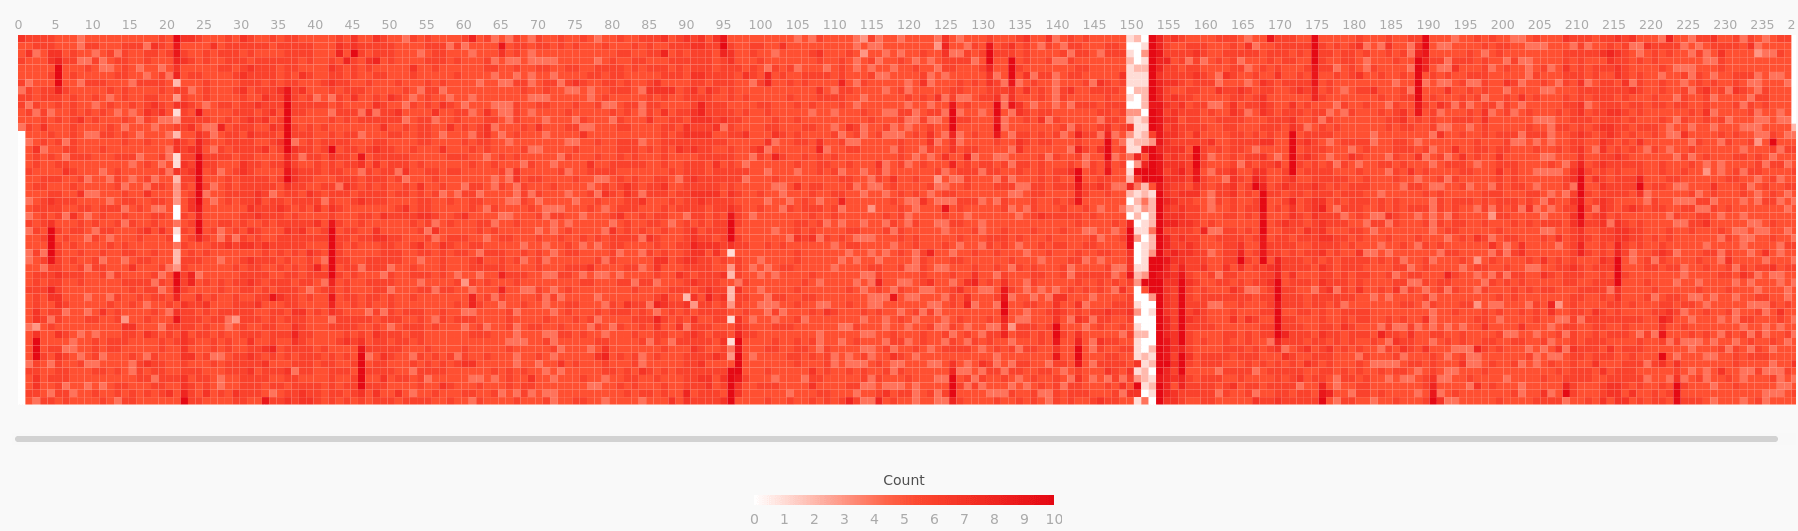 Heat map shows one large gap and two small gaps in an otherwise uniform pattern of 70 percent to 80 percent CPU usage